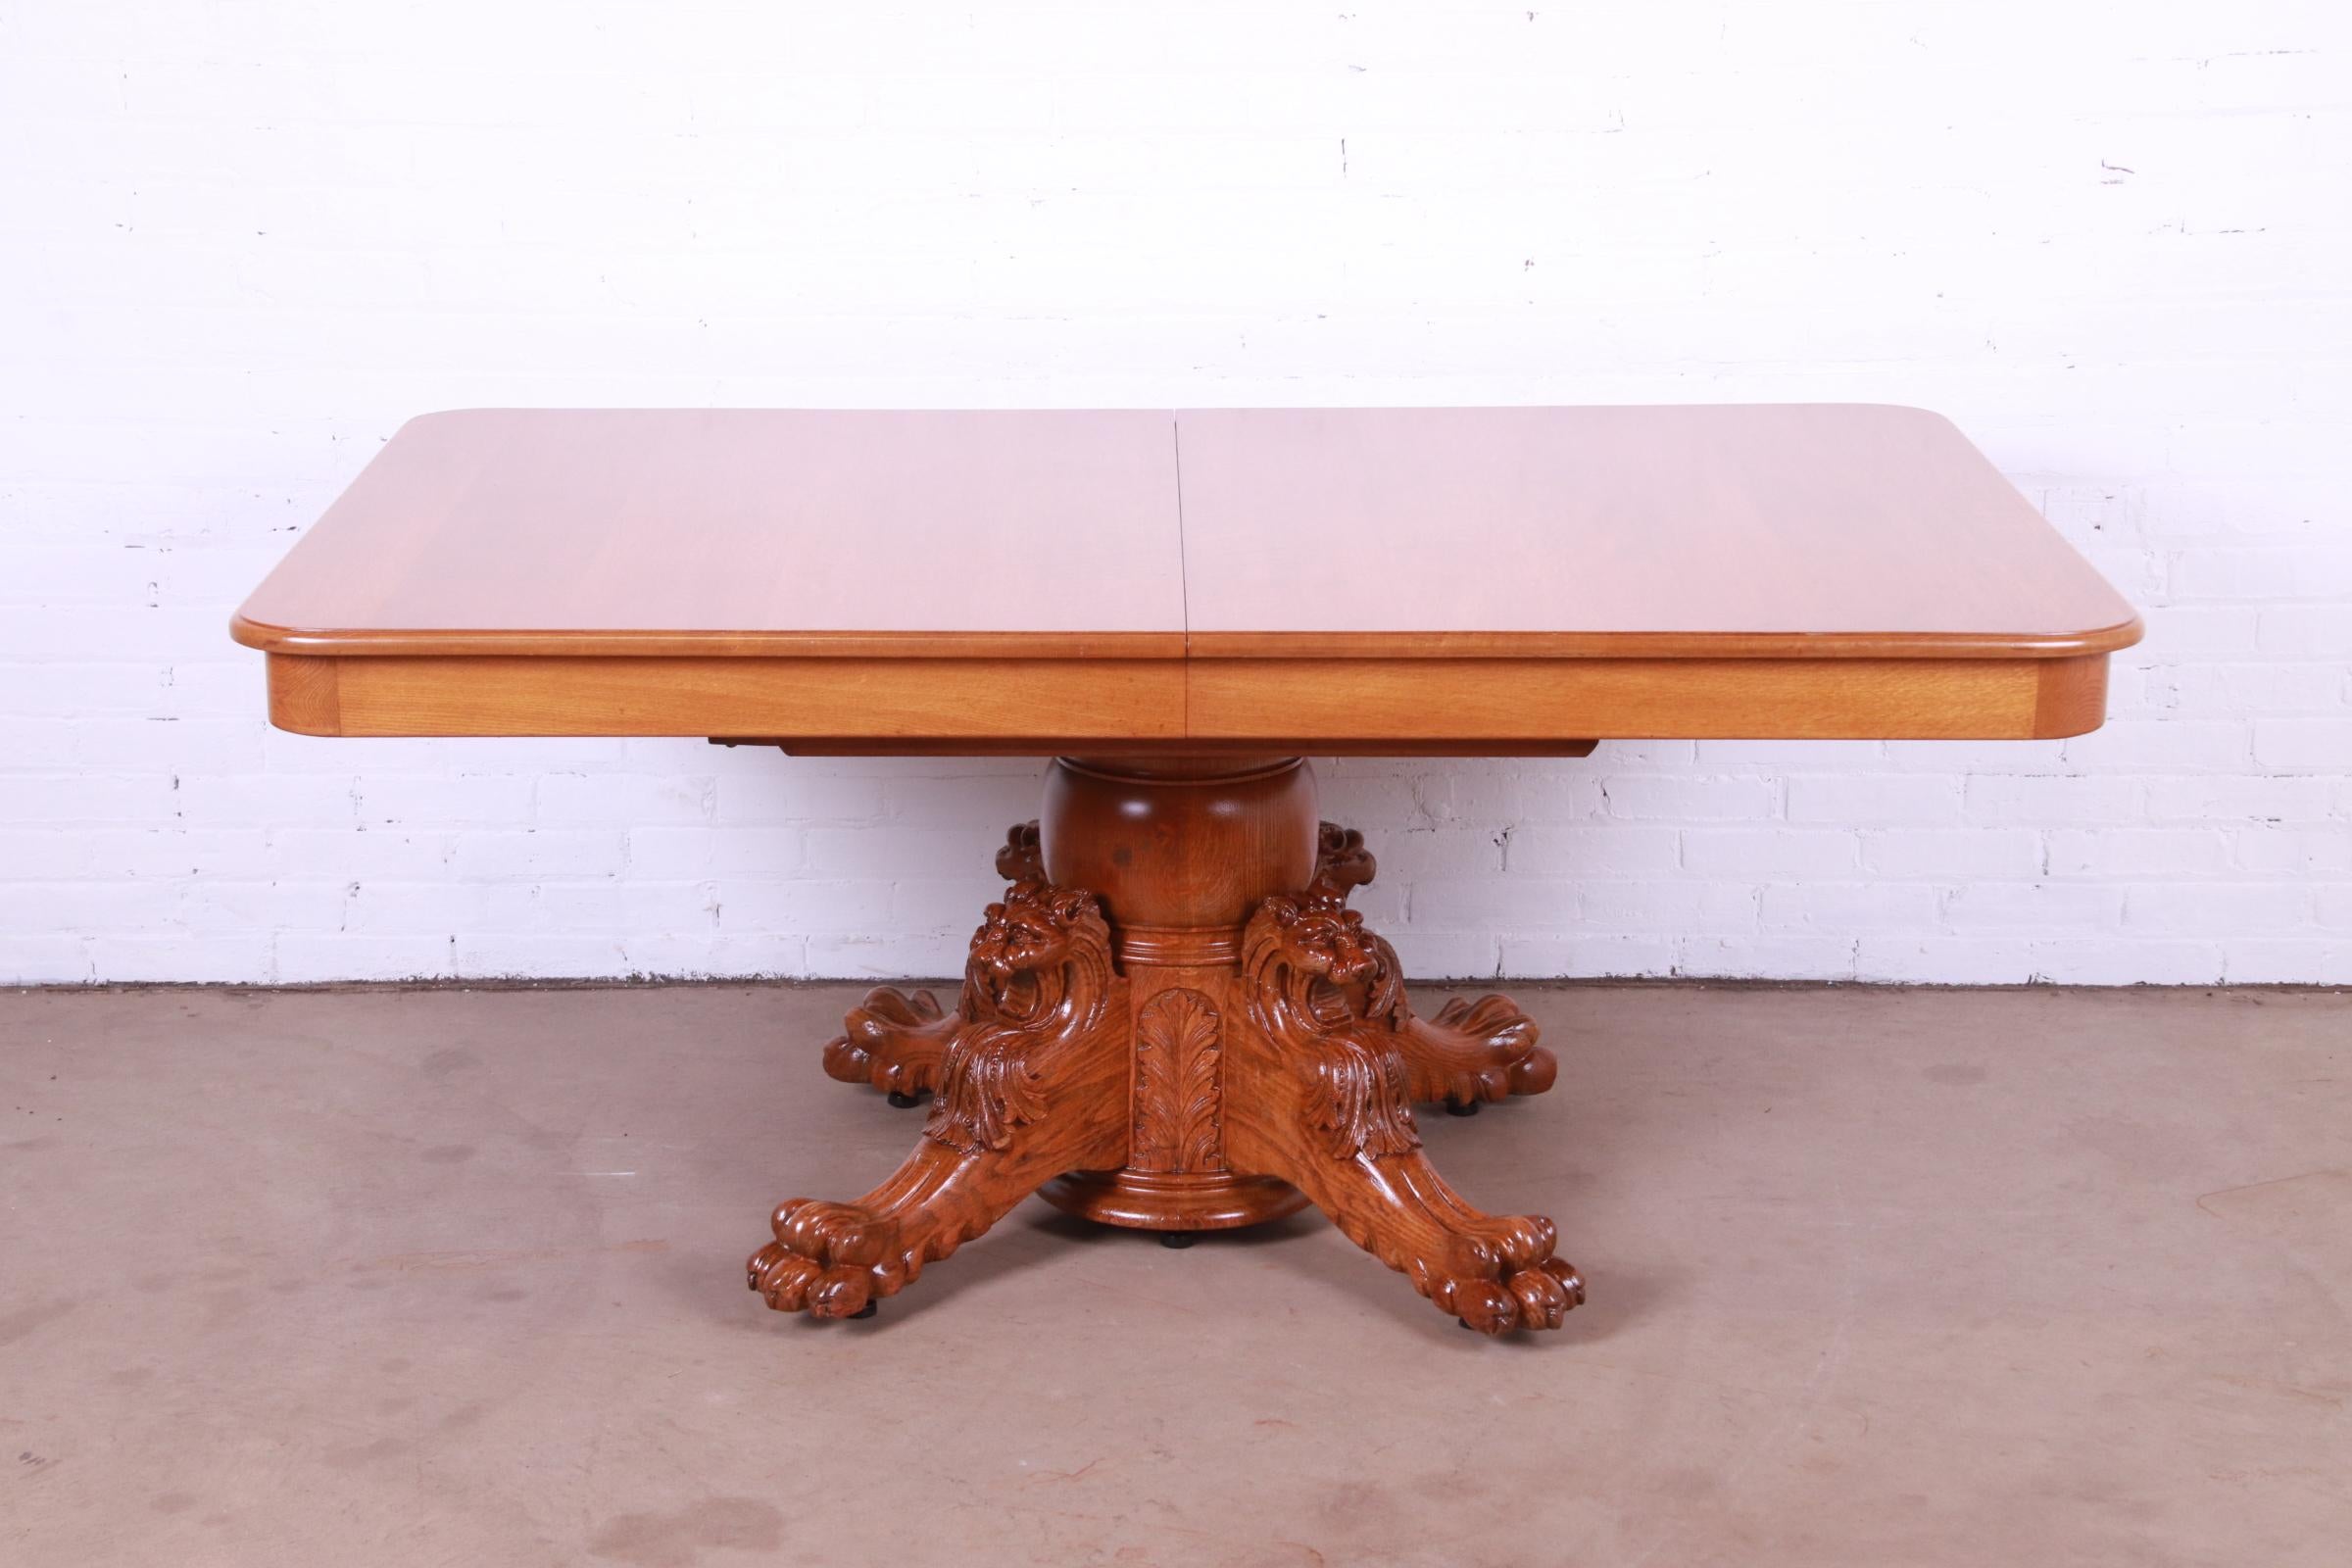 An outstanding antique Victorian extension pedestal dining table.

By R.J. Horner & Co.

USA, late 19th century.

Oak, with ornate pedestal with carved lion heads and paw feet.

Measures: 67